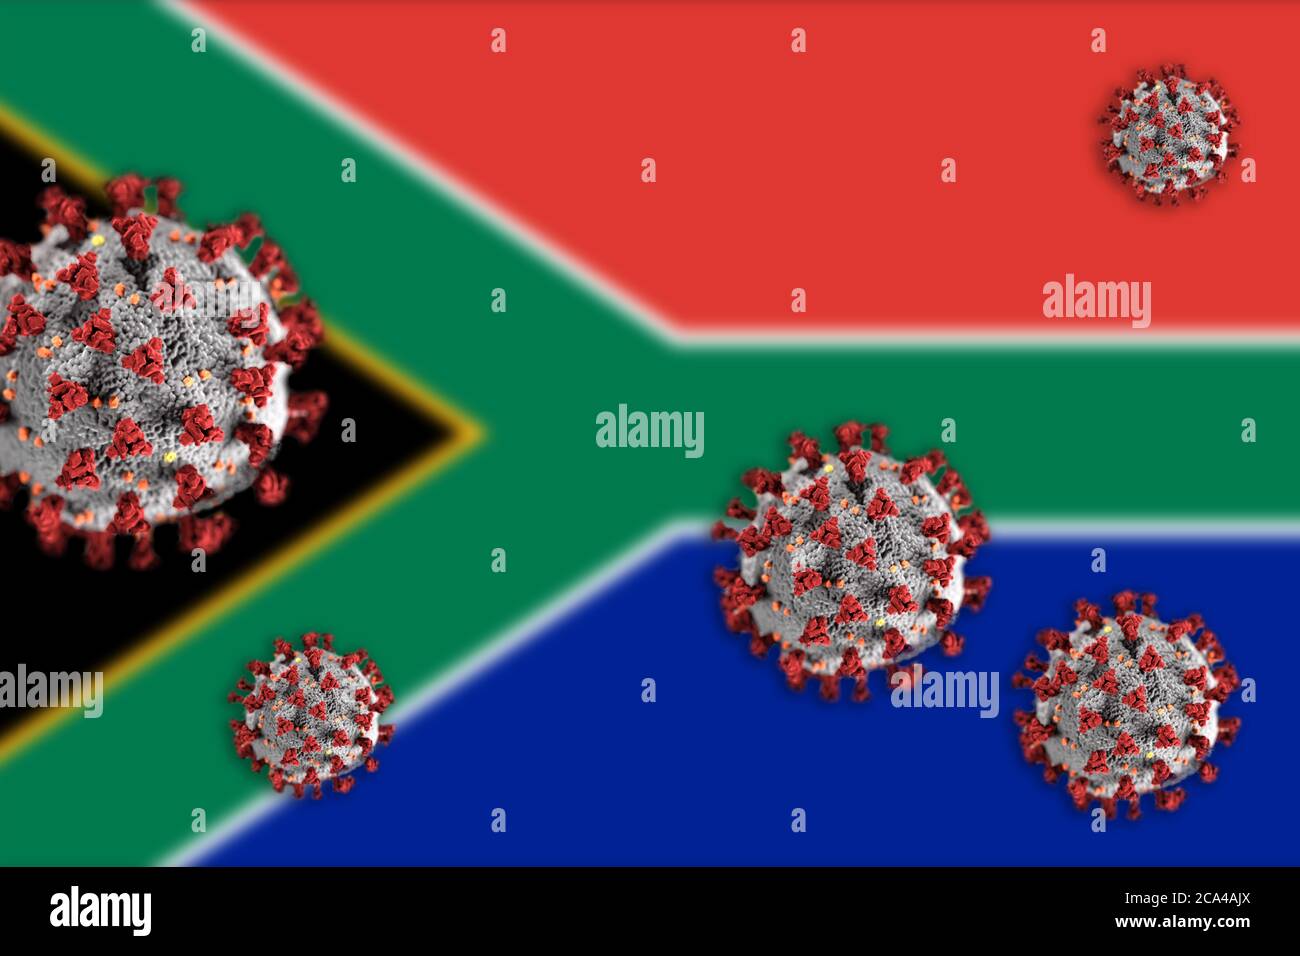 Concept of Coronavirus or Covid-19 particles overshadowing blurred flag of South Africa in background. Stock Photo